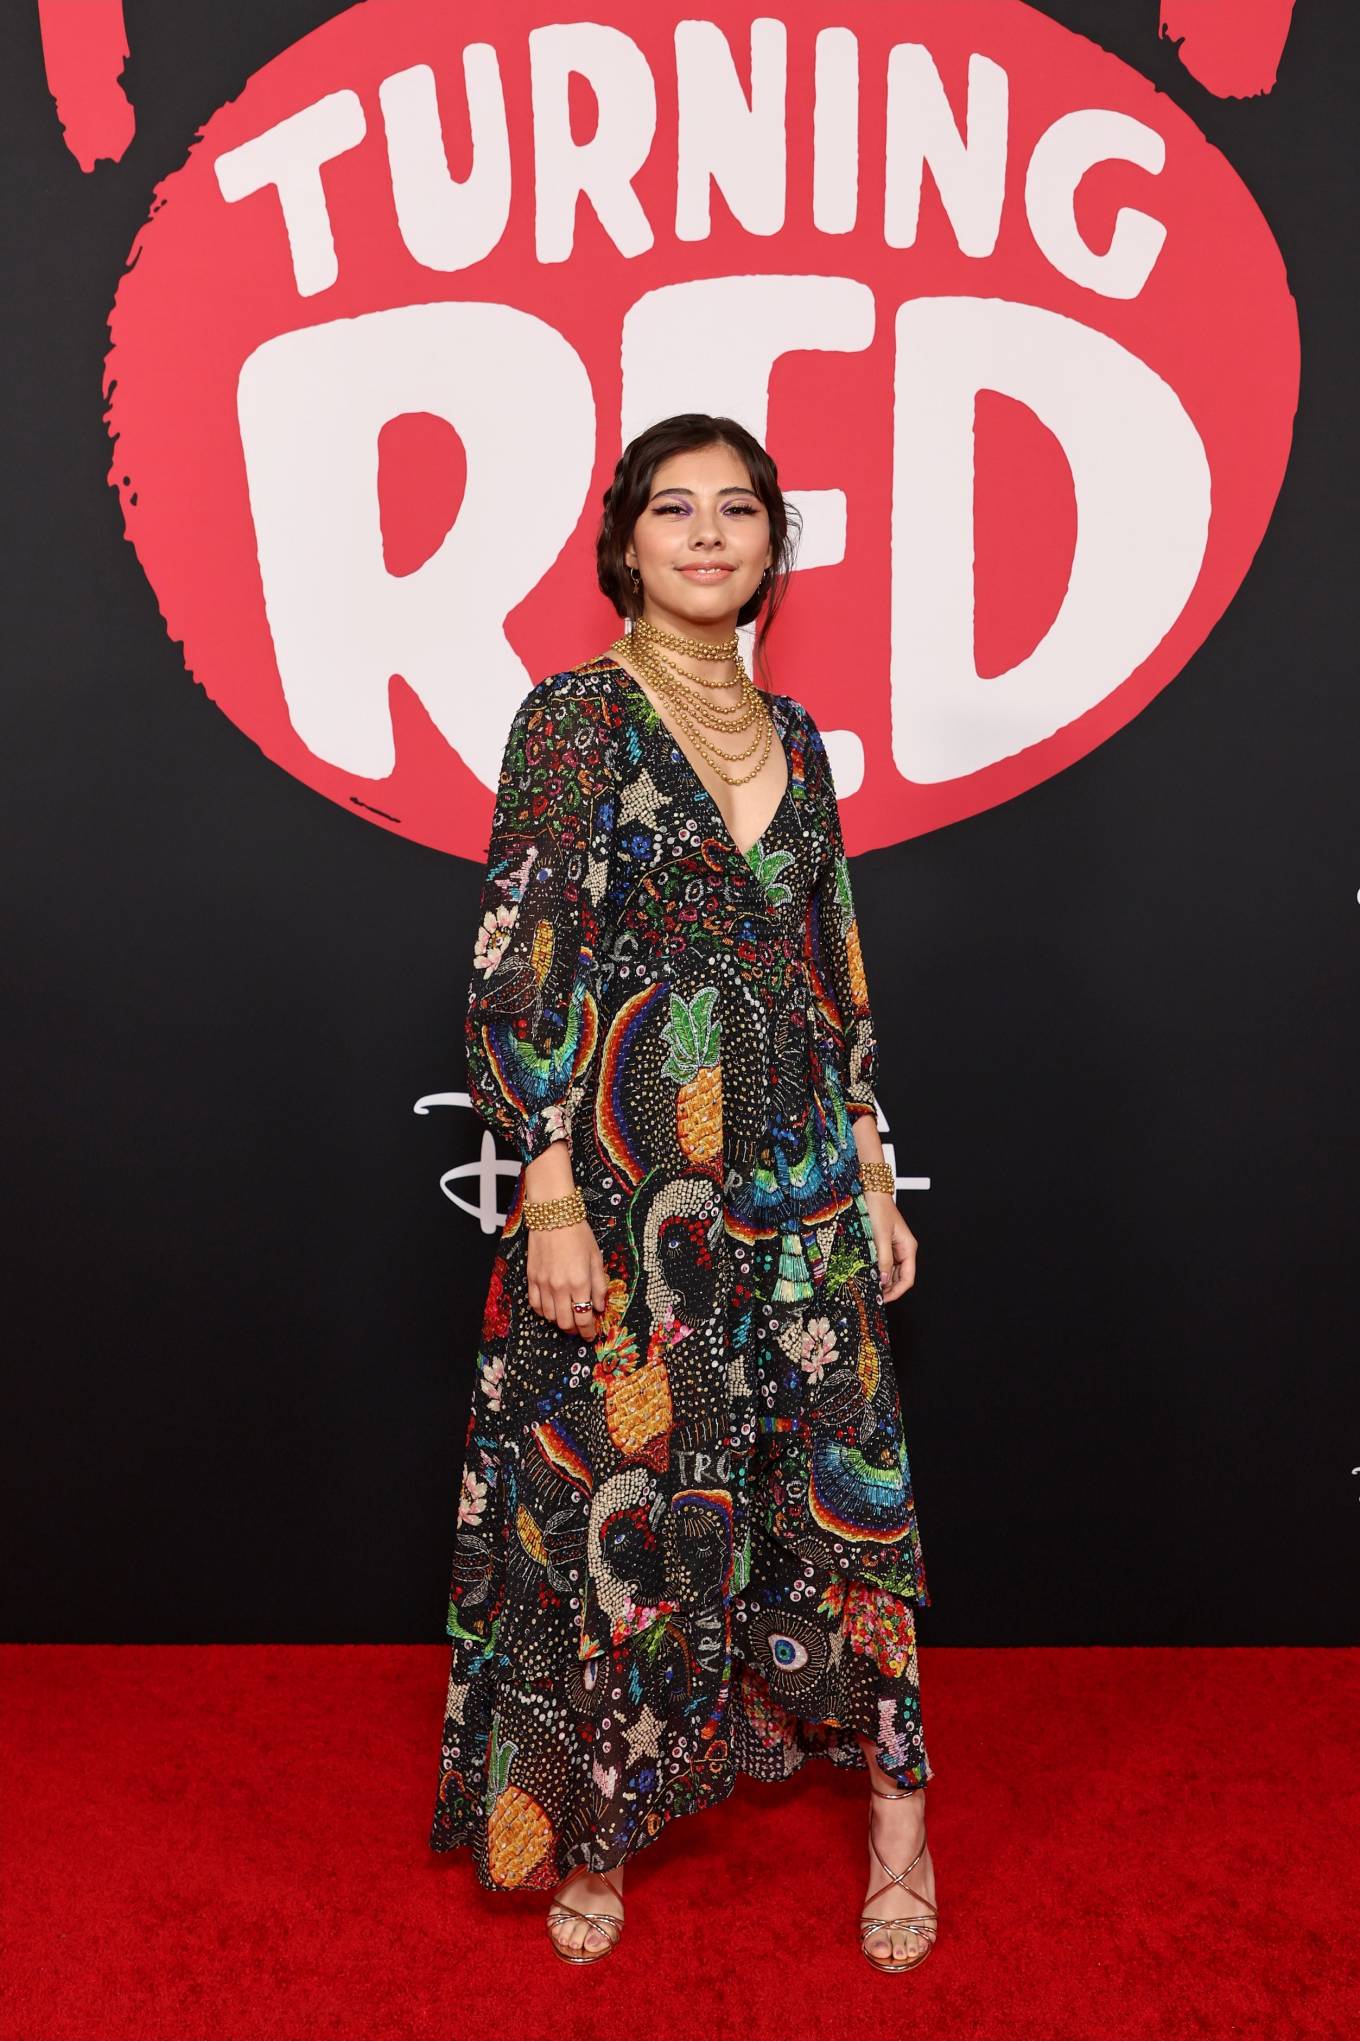 Xochitl Gomez - Attends the world premiere of Turning Red at El Capitan Theatre in Hollywood